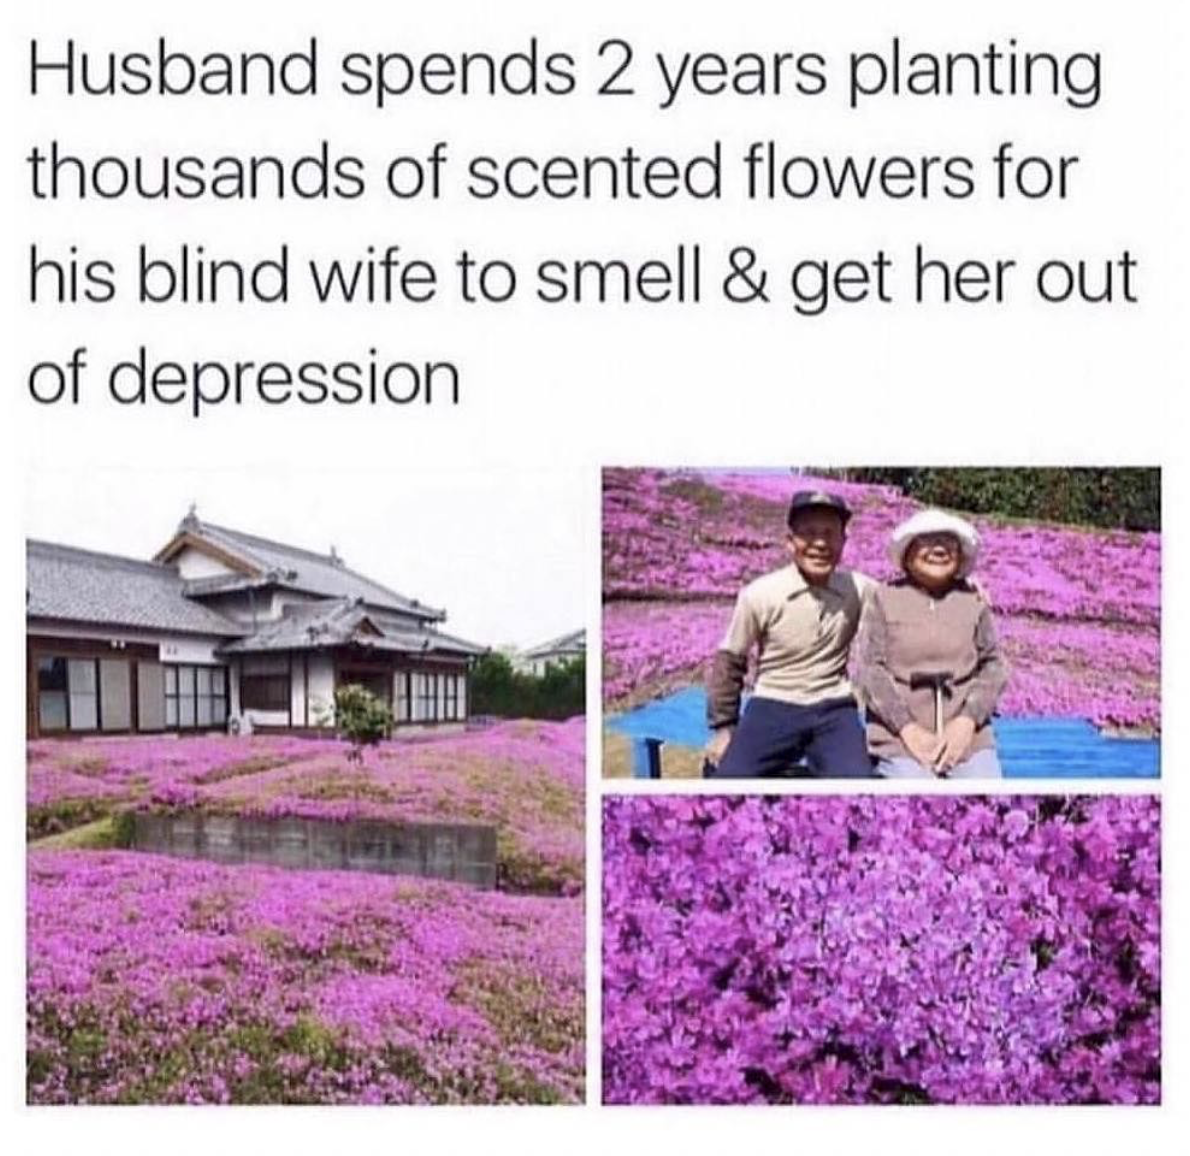 wholesome memes and pics - husband spends 2 years planting flowers - Husband spends 2 years planting thousands of scented flowers for his blind wife to smell & get her out of depression